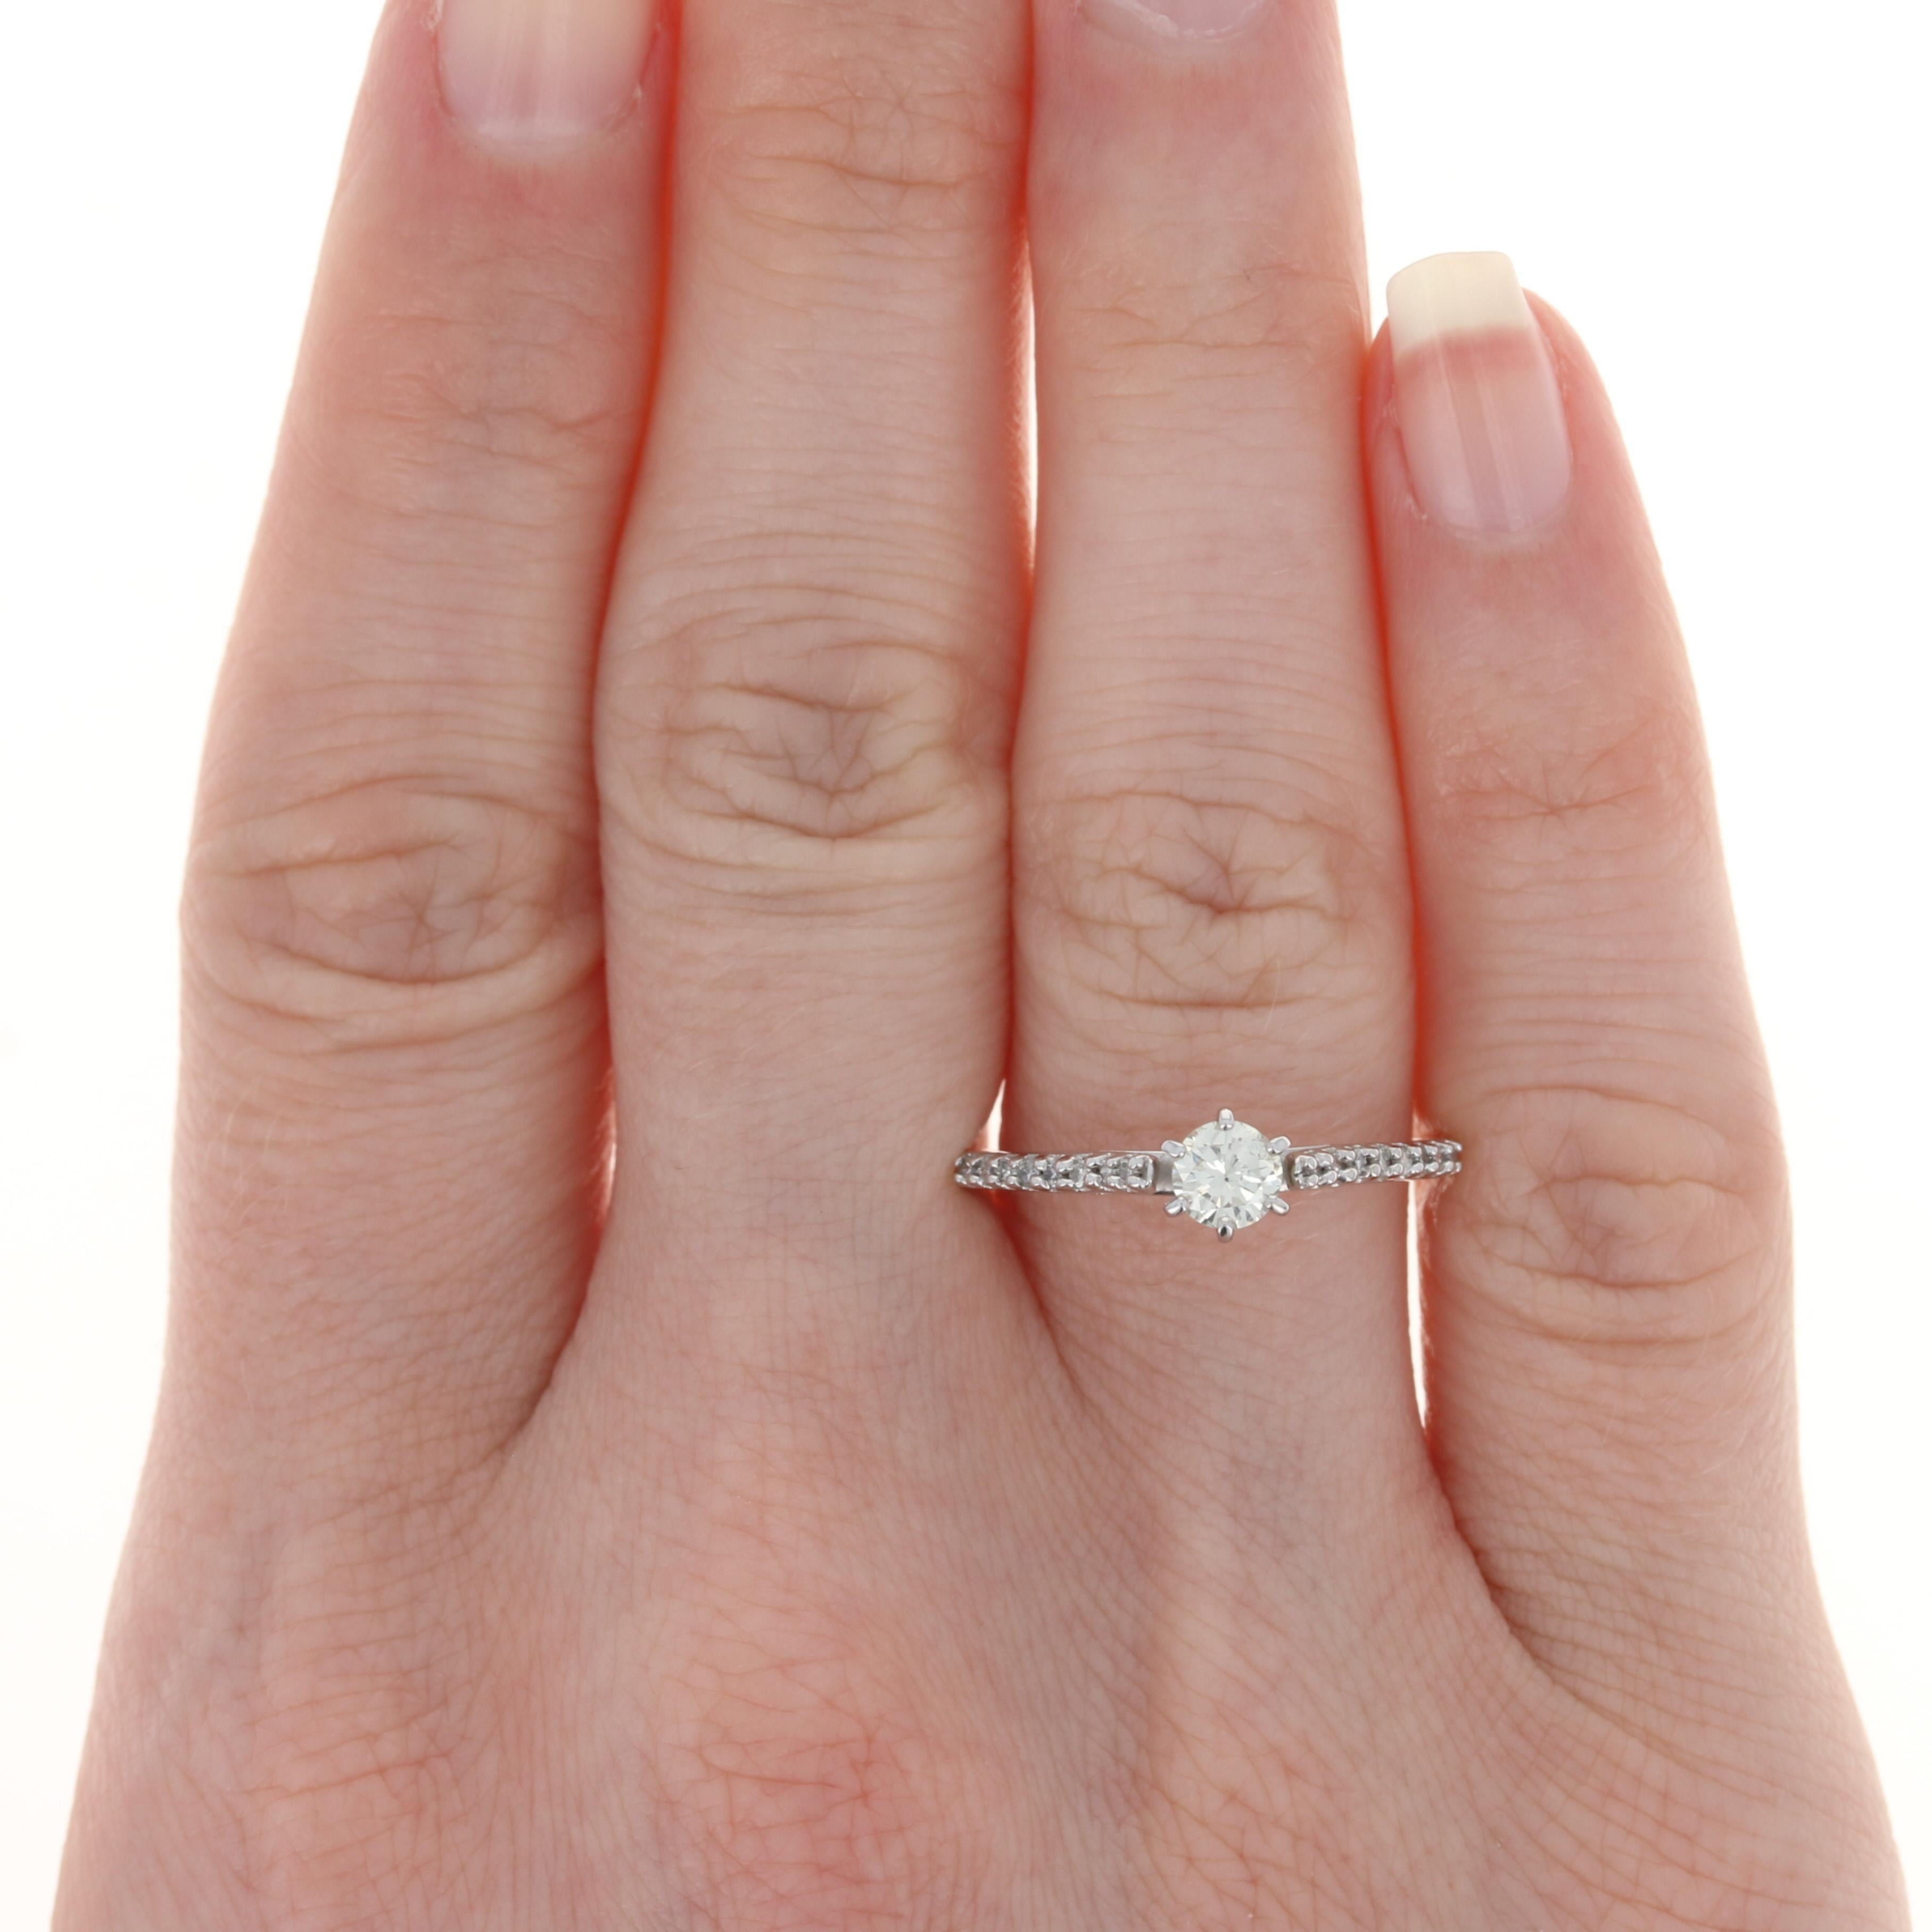 Size: 8
Sizing Fee: Up 2 sizes for $25 or down 2 sizes for $20

Metal Content: 10k White Gold 

Stone Information: 
Natural Diamond (solitaire)
Carat: .35ct
Cut: Round Brilliant 
Color: N
Clarity: SI2
Diameter: 4.4mm 

Natural Diamonds